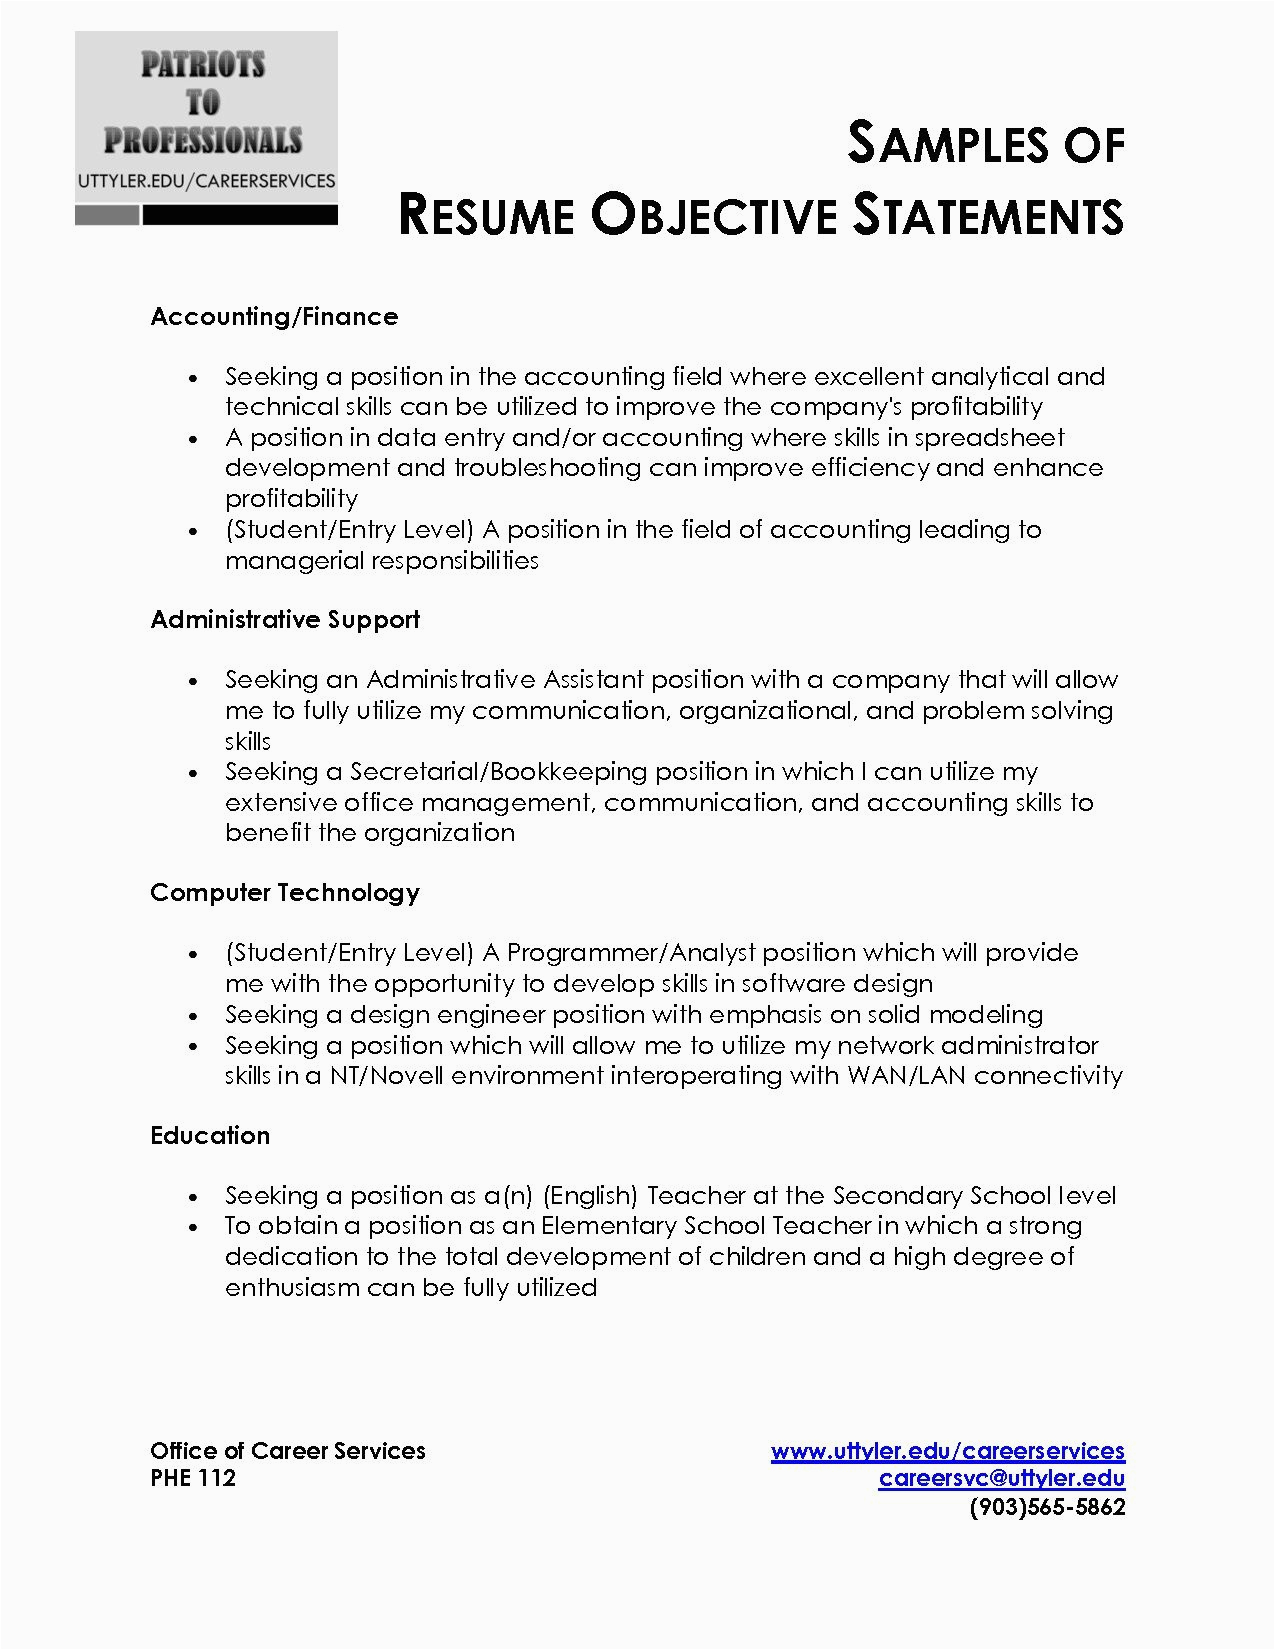 Sample Objectives to Put On A Resume Examples Of Great Resume Objective Statements Resume